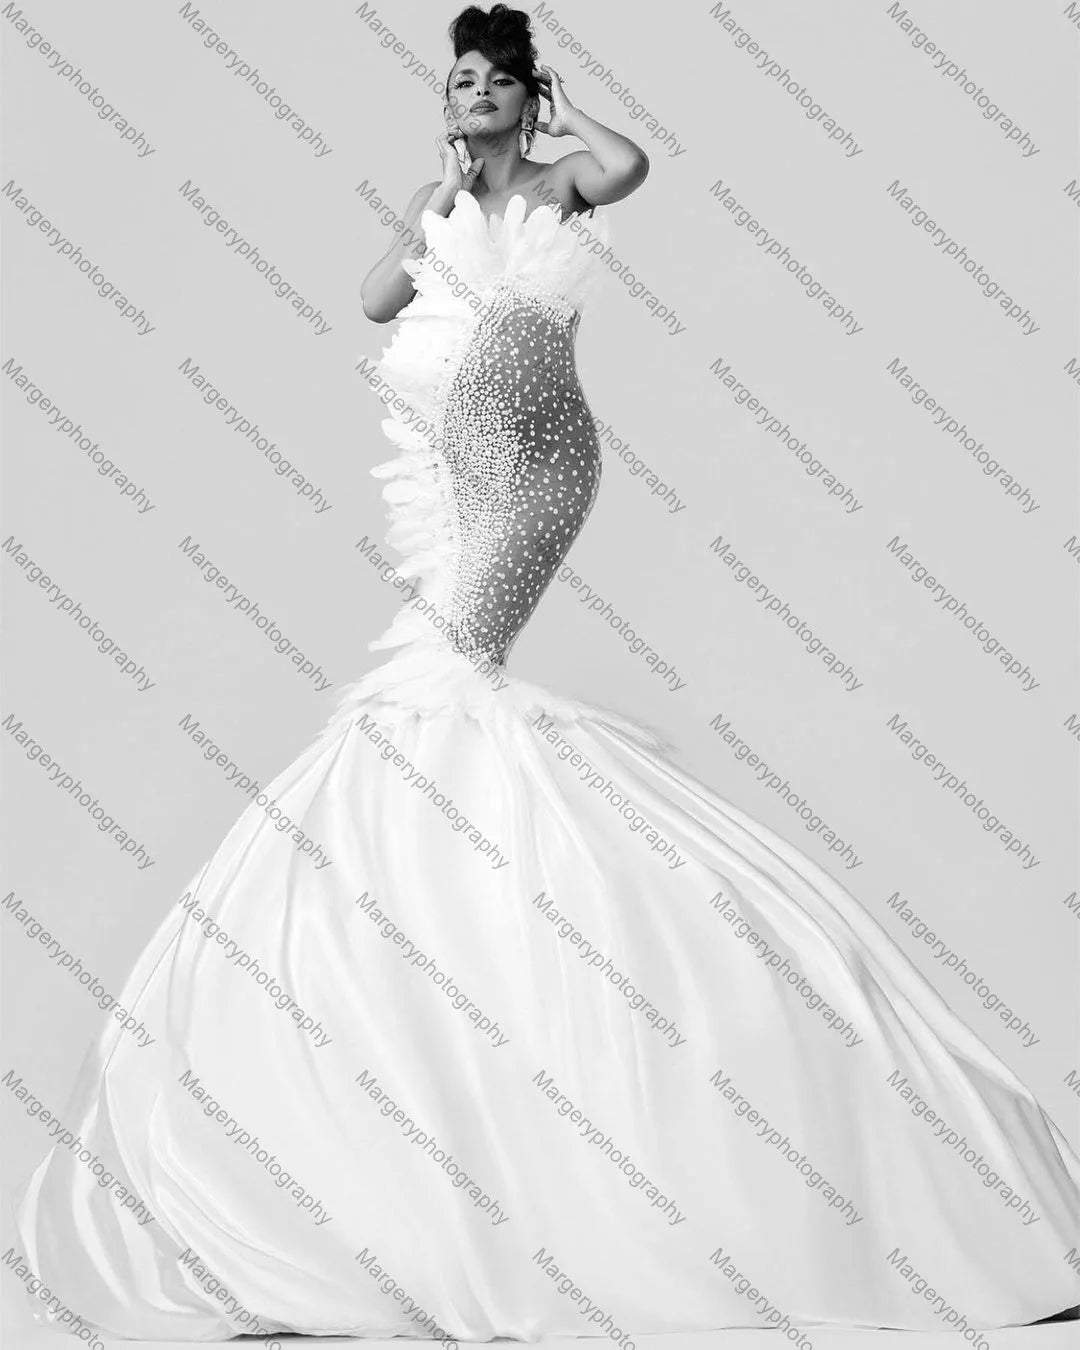 Luxury White Beaded Crystals Mermaid Maternity Dress Sexy Strapless Feather Pregnancy Dresses See Thru Bridal Gowns Photo Shoot